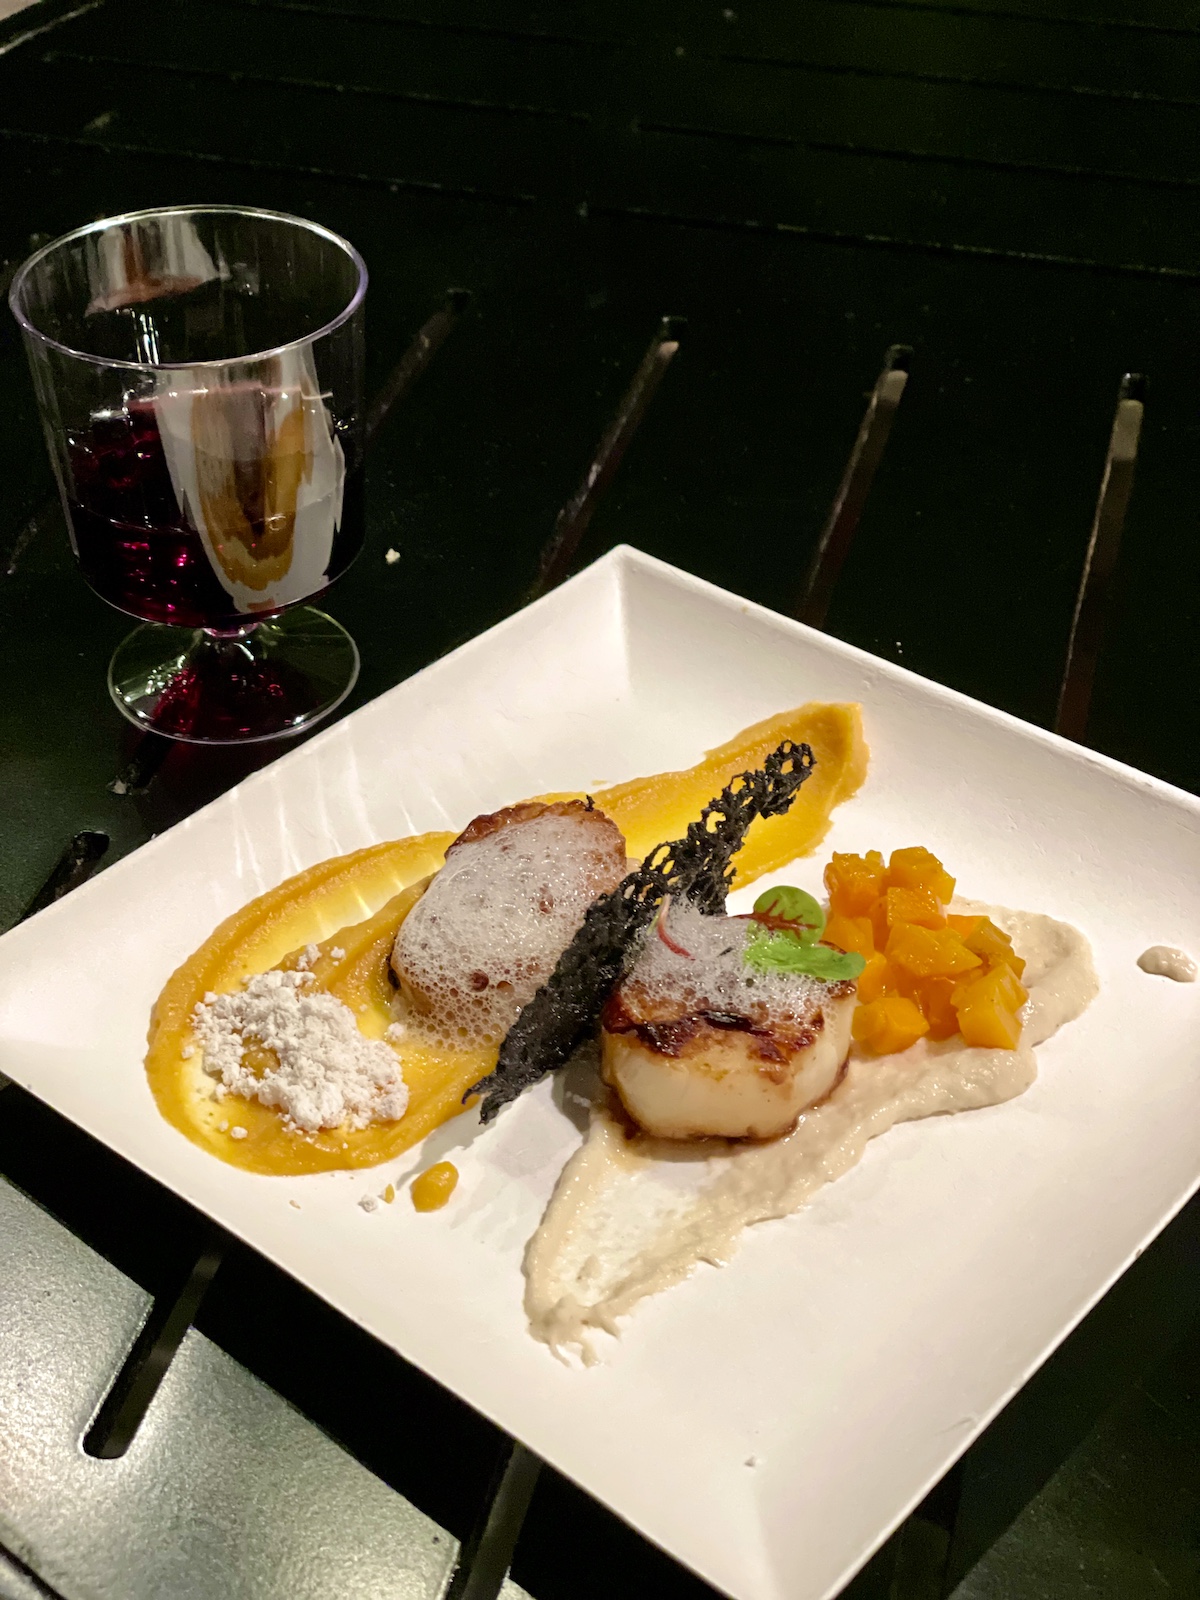 Scallops at Epcot Festival of the Arts 2022.